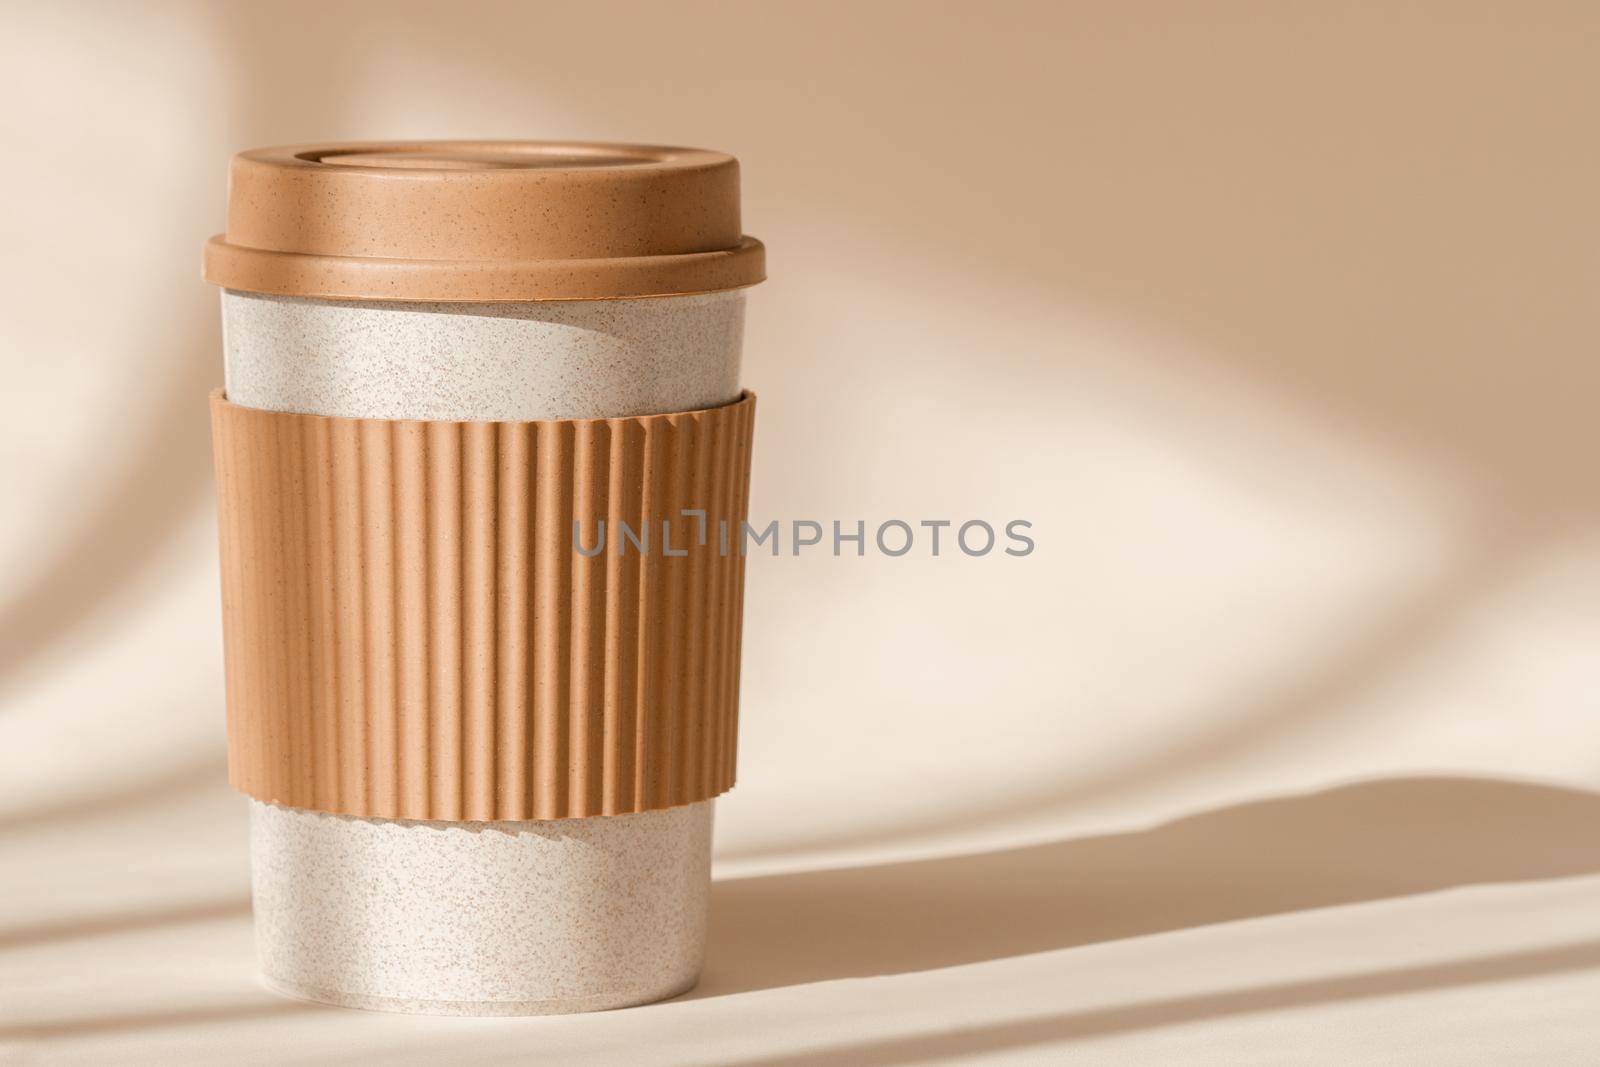 Sustainable bamboo eco friendly cup with silicone holder on natural shadow beige background. Reusable, biodegradable travel plastic coffee mug for take away. Zero waste, sustainability by photolime